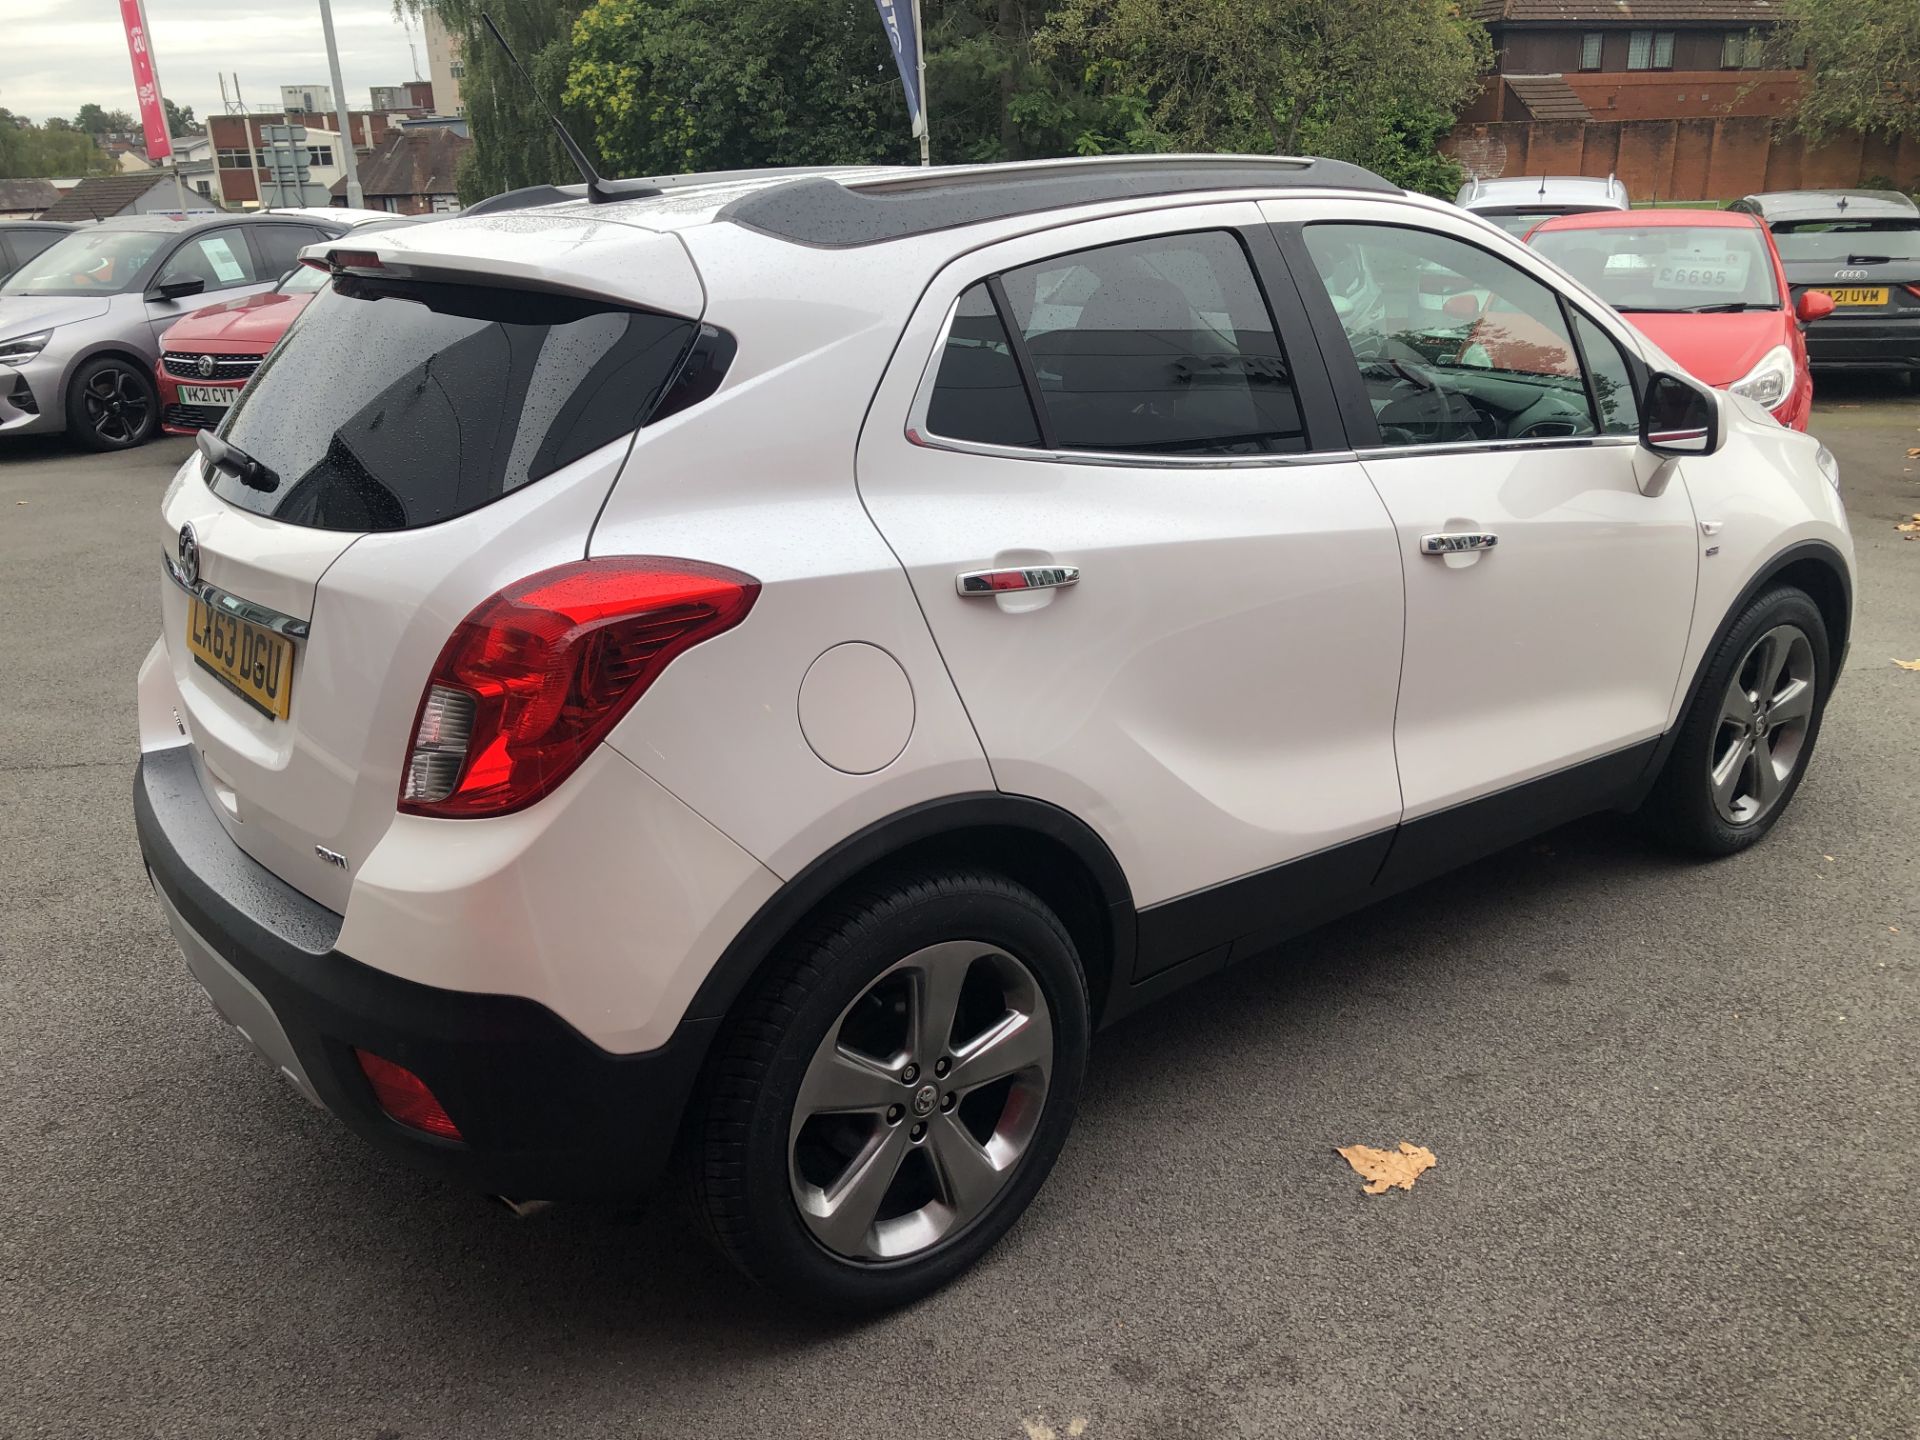 Vauxhall Mokka 1.7 CDTi (130ps) SE 5dr Automatic, Registration: LX63DGU, Date First Registered: 28/ - Image 4 of 7